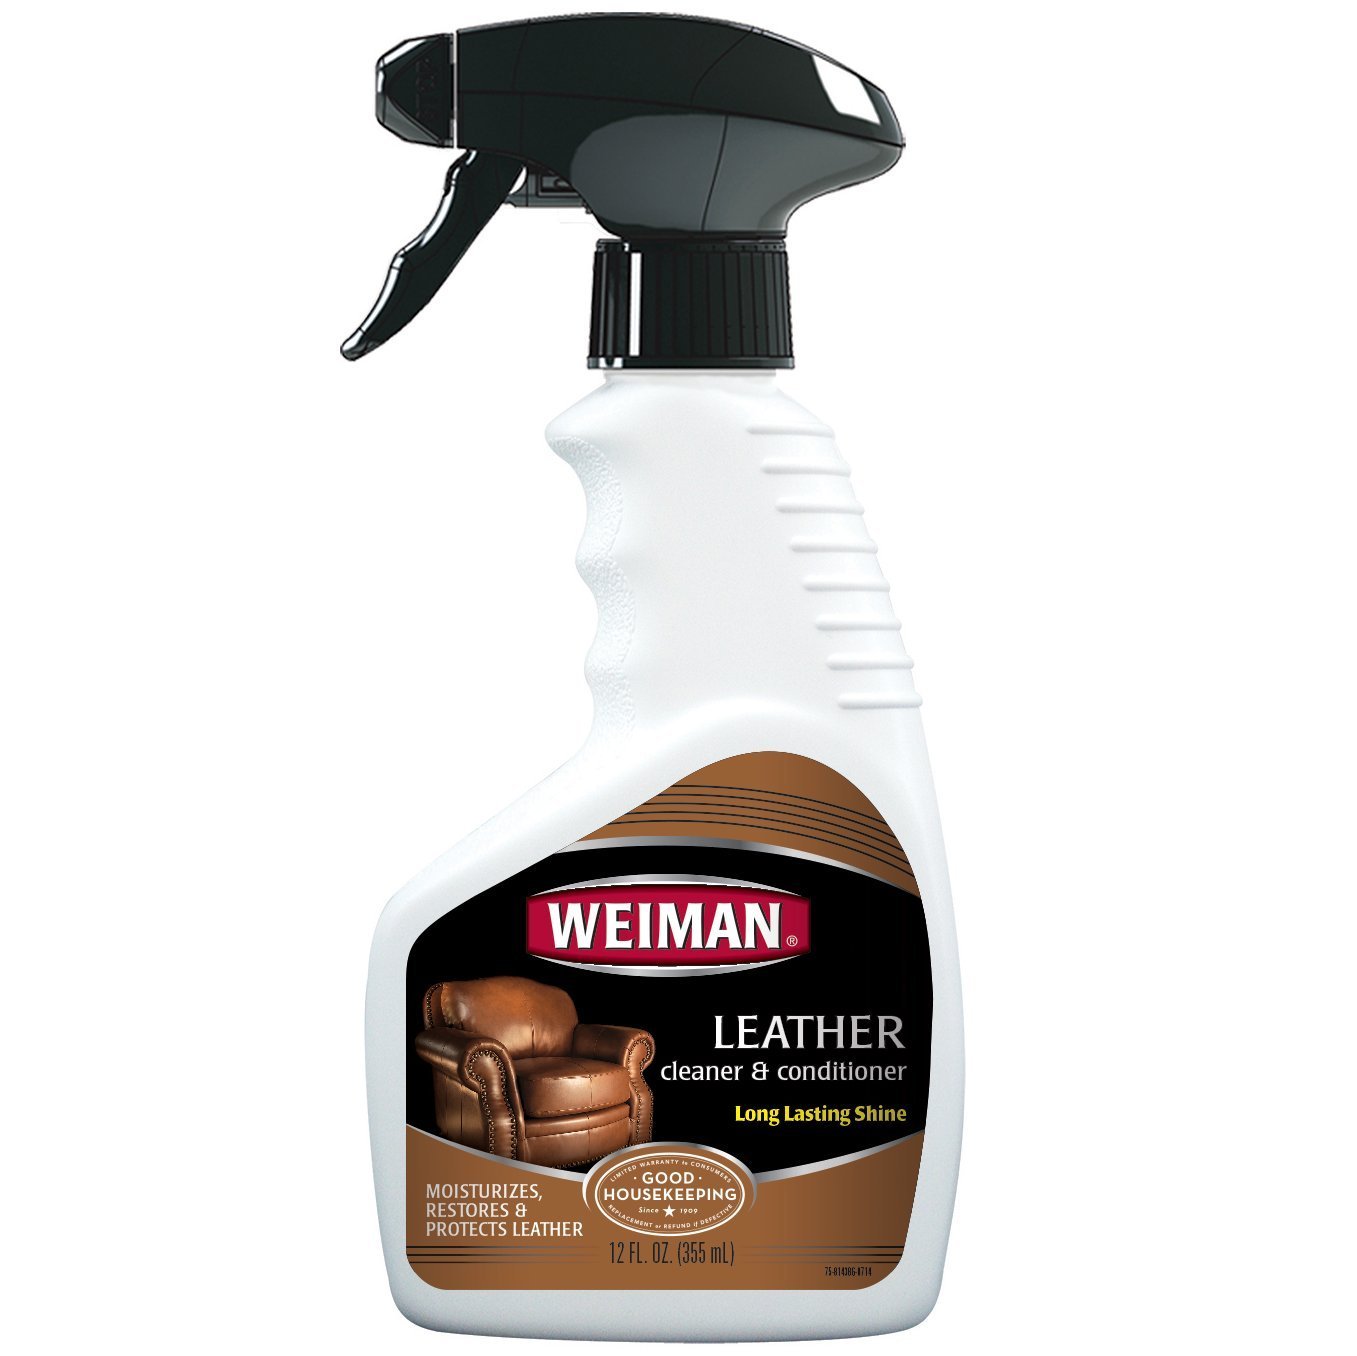 Weiman Leather Cleaner & Conditioner - Gentle Formula Cleans, Conditions and Restores Leather and Vinyl Surfaces 